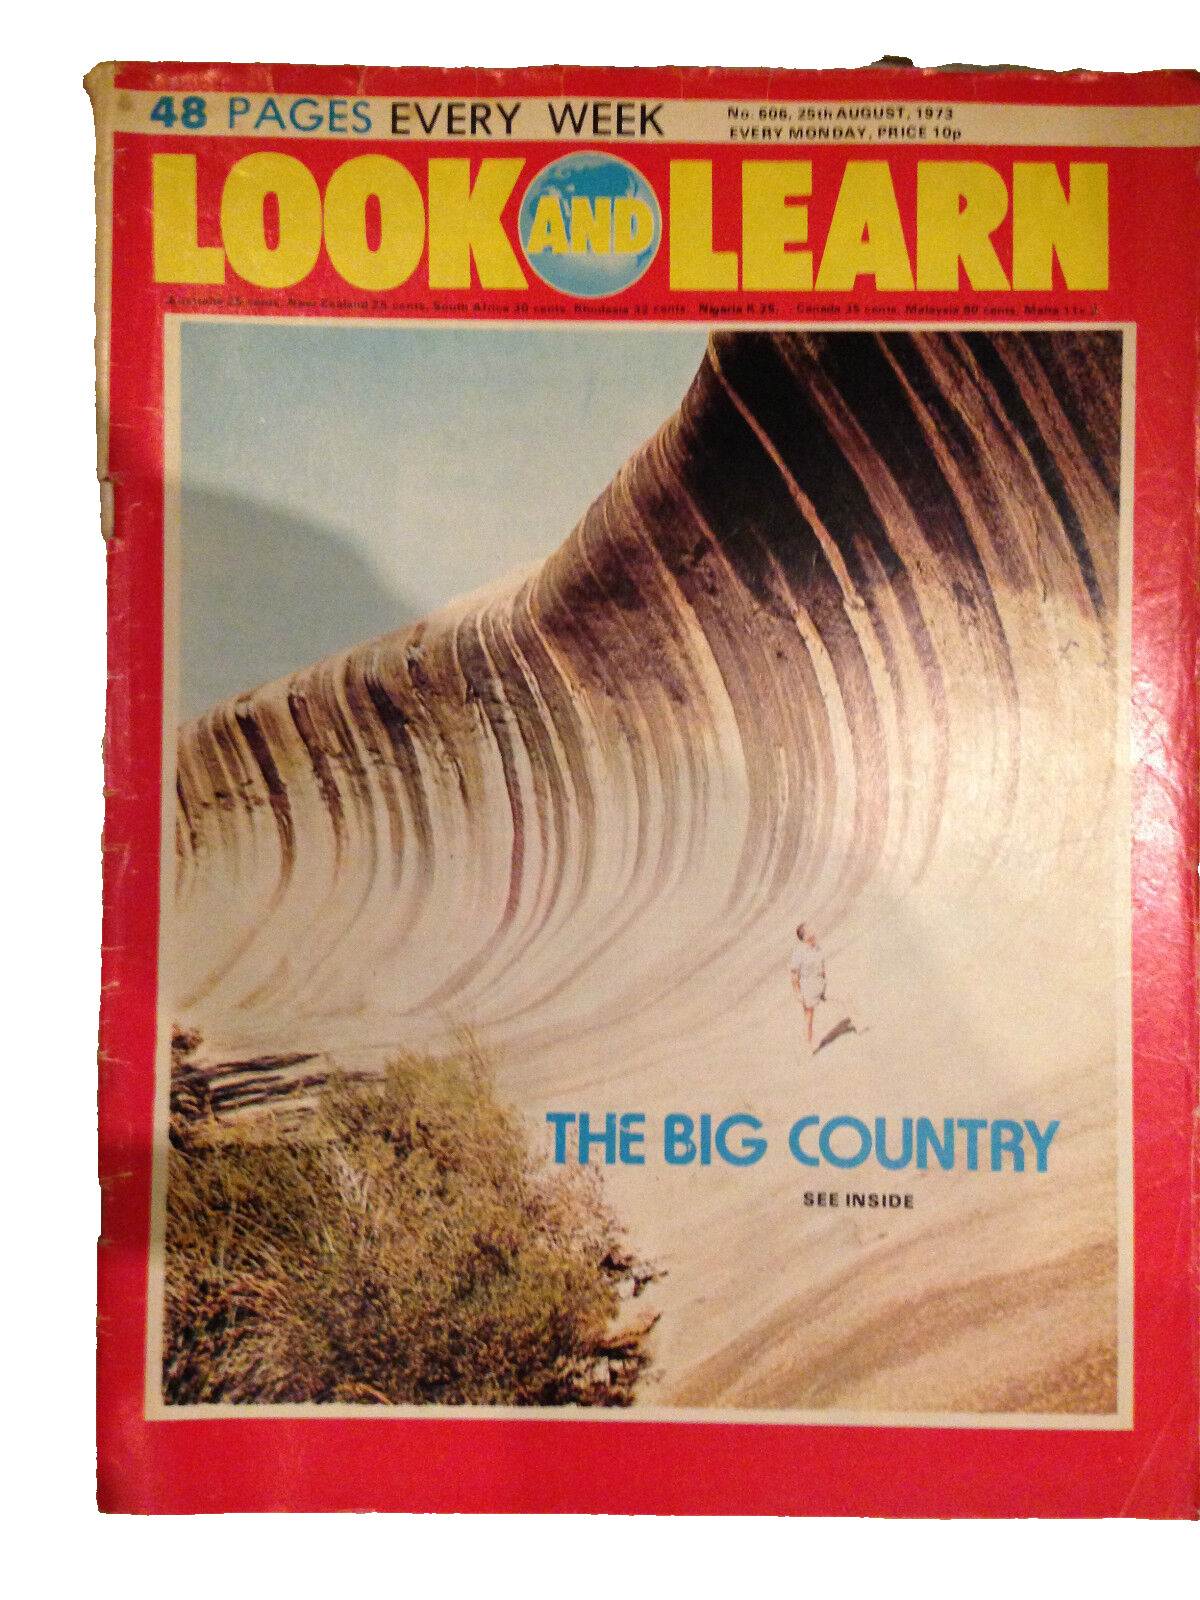 Look And Learn Magazine No.606, 25th August 1973 - The Big Country